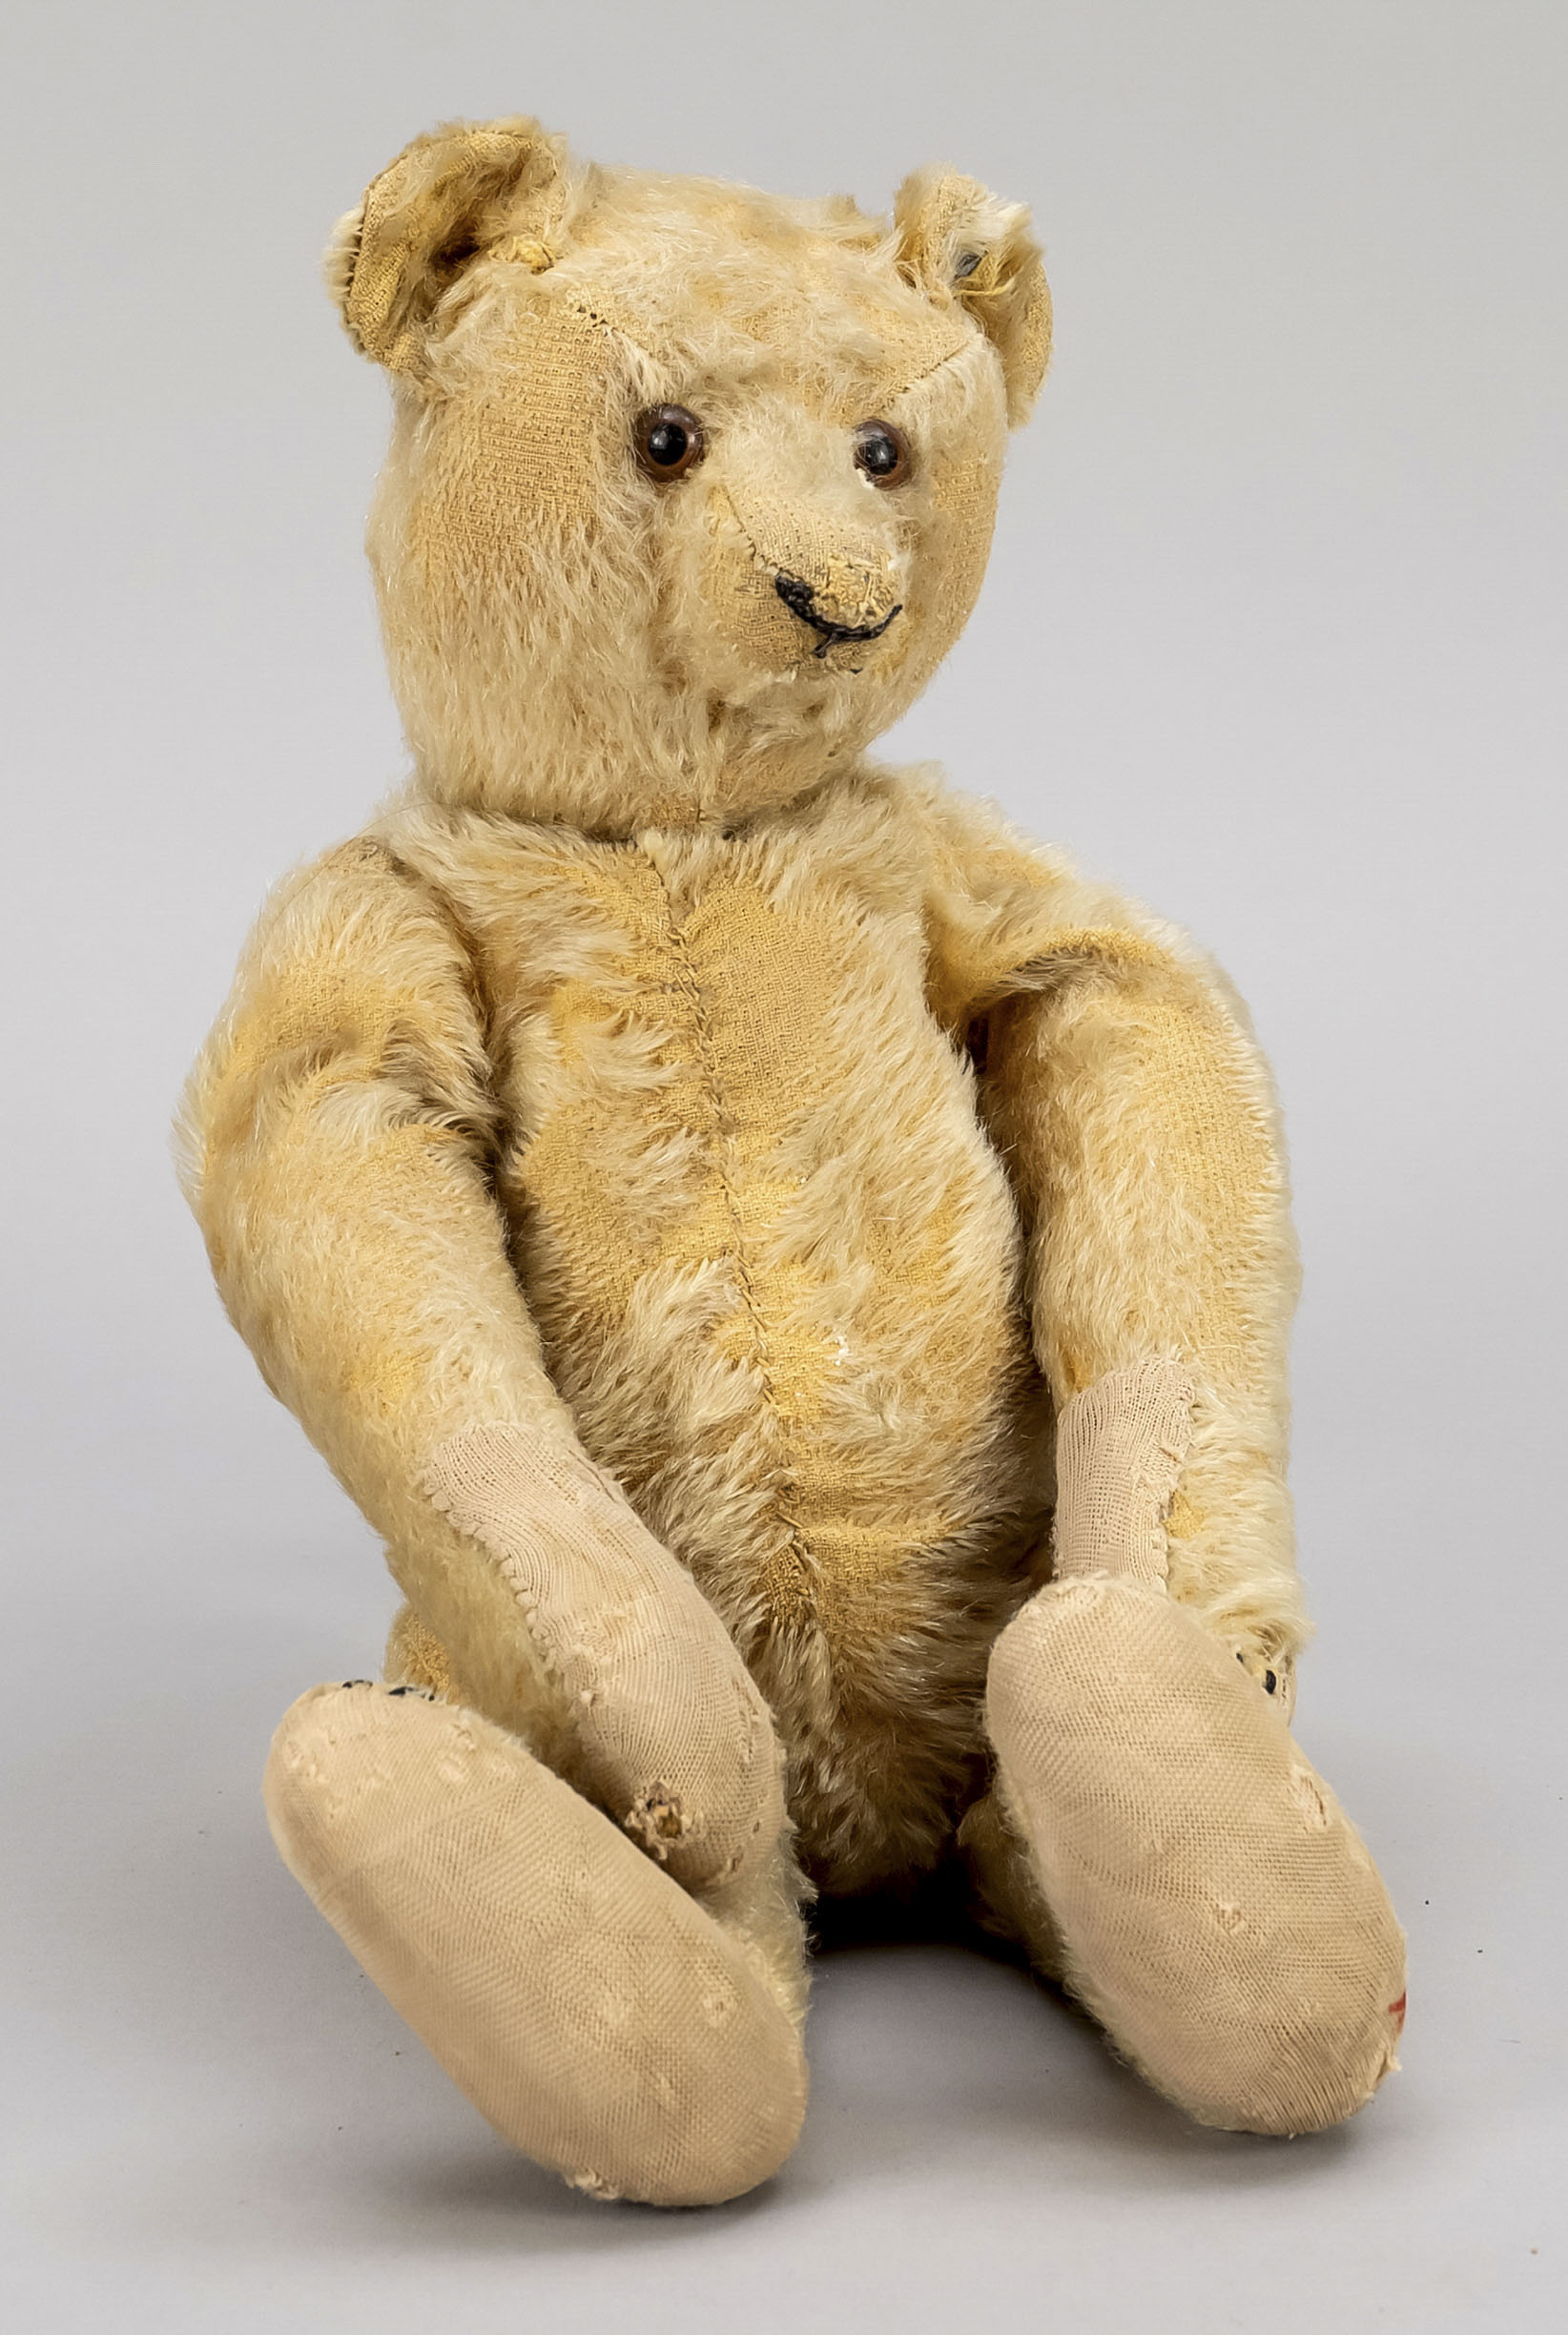 Steiff teddy bear, Germany, around 1905, movable arms and legs. Mended here and there, heavy fur